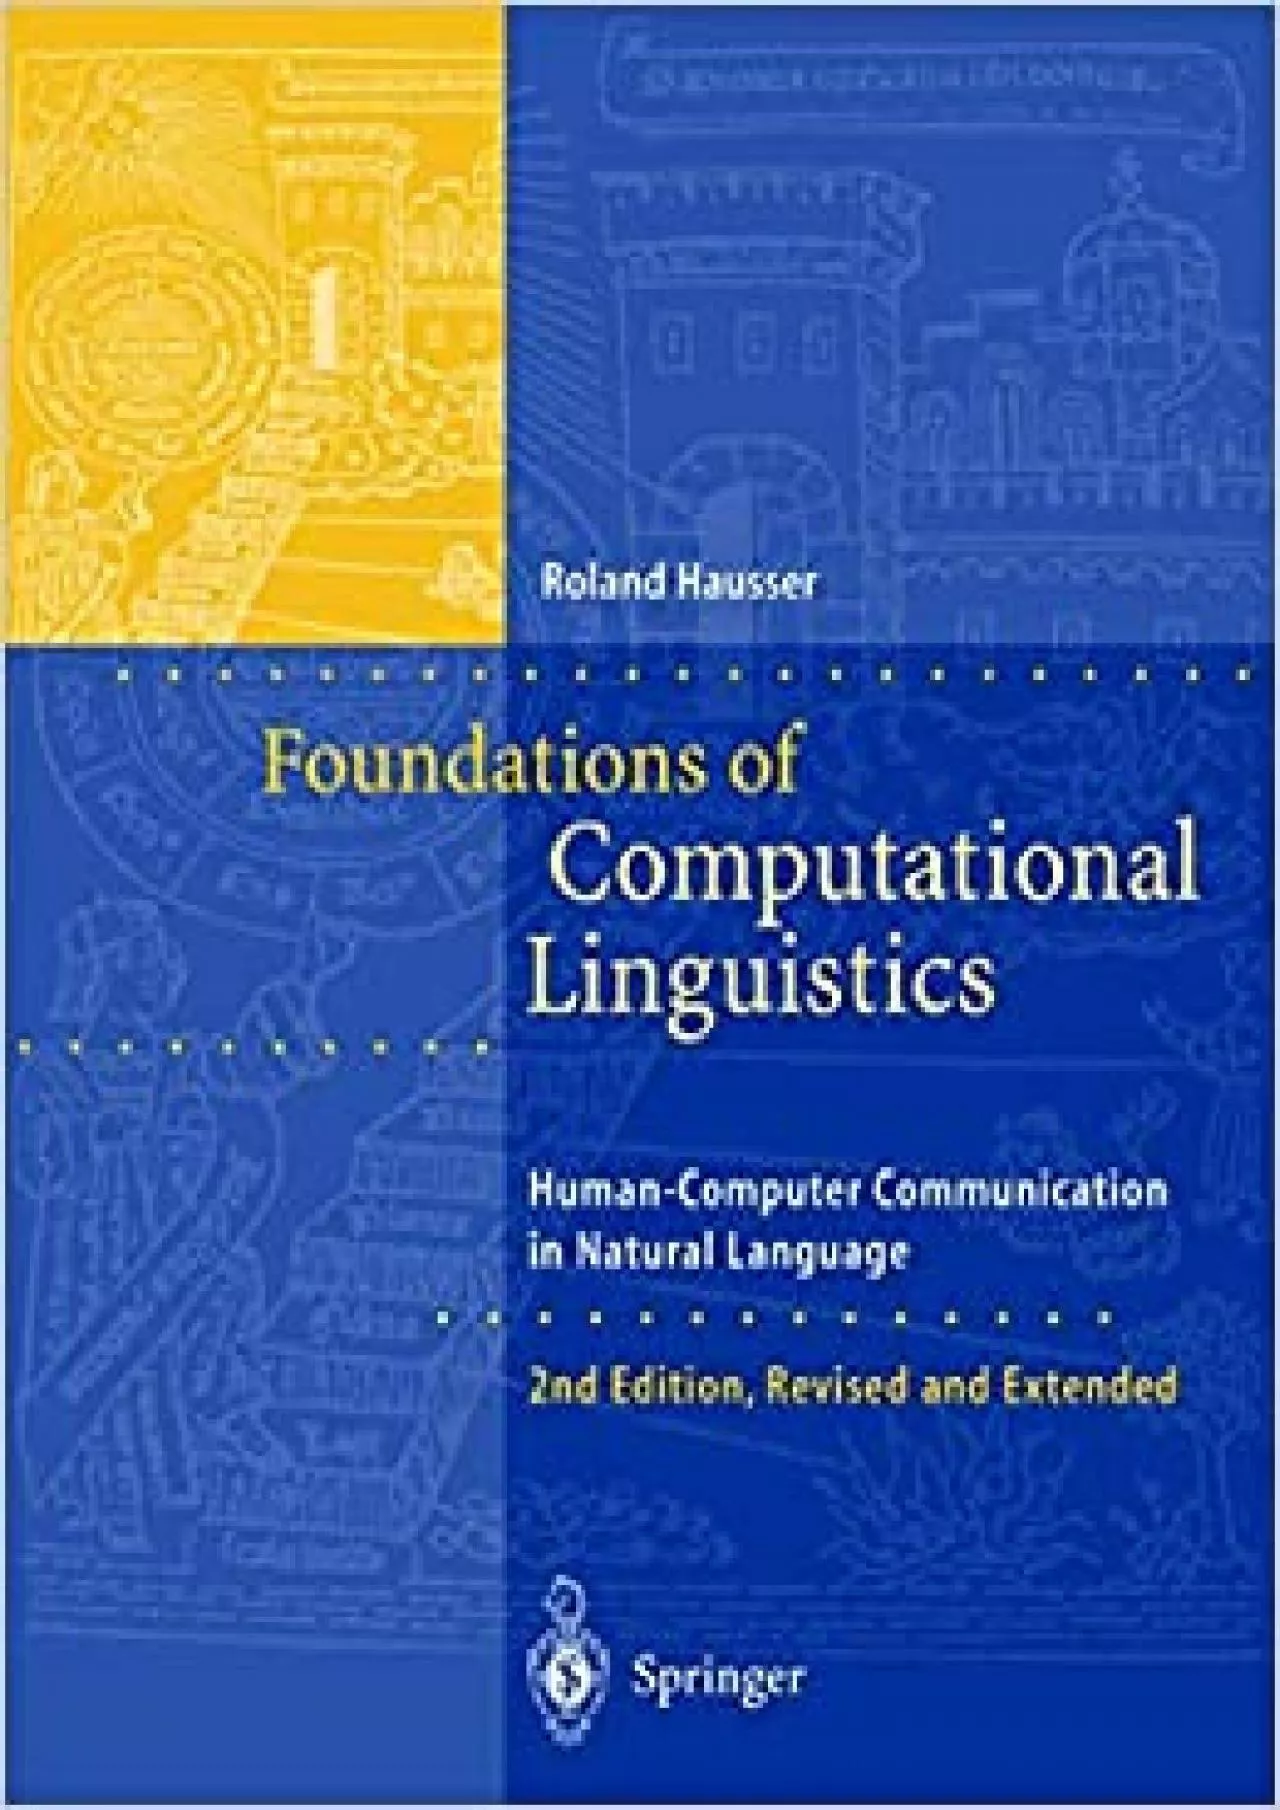 (READ)-Foundations of Computational Linguistics Human-Computer Communication in Natural